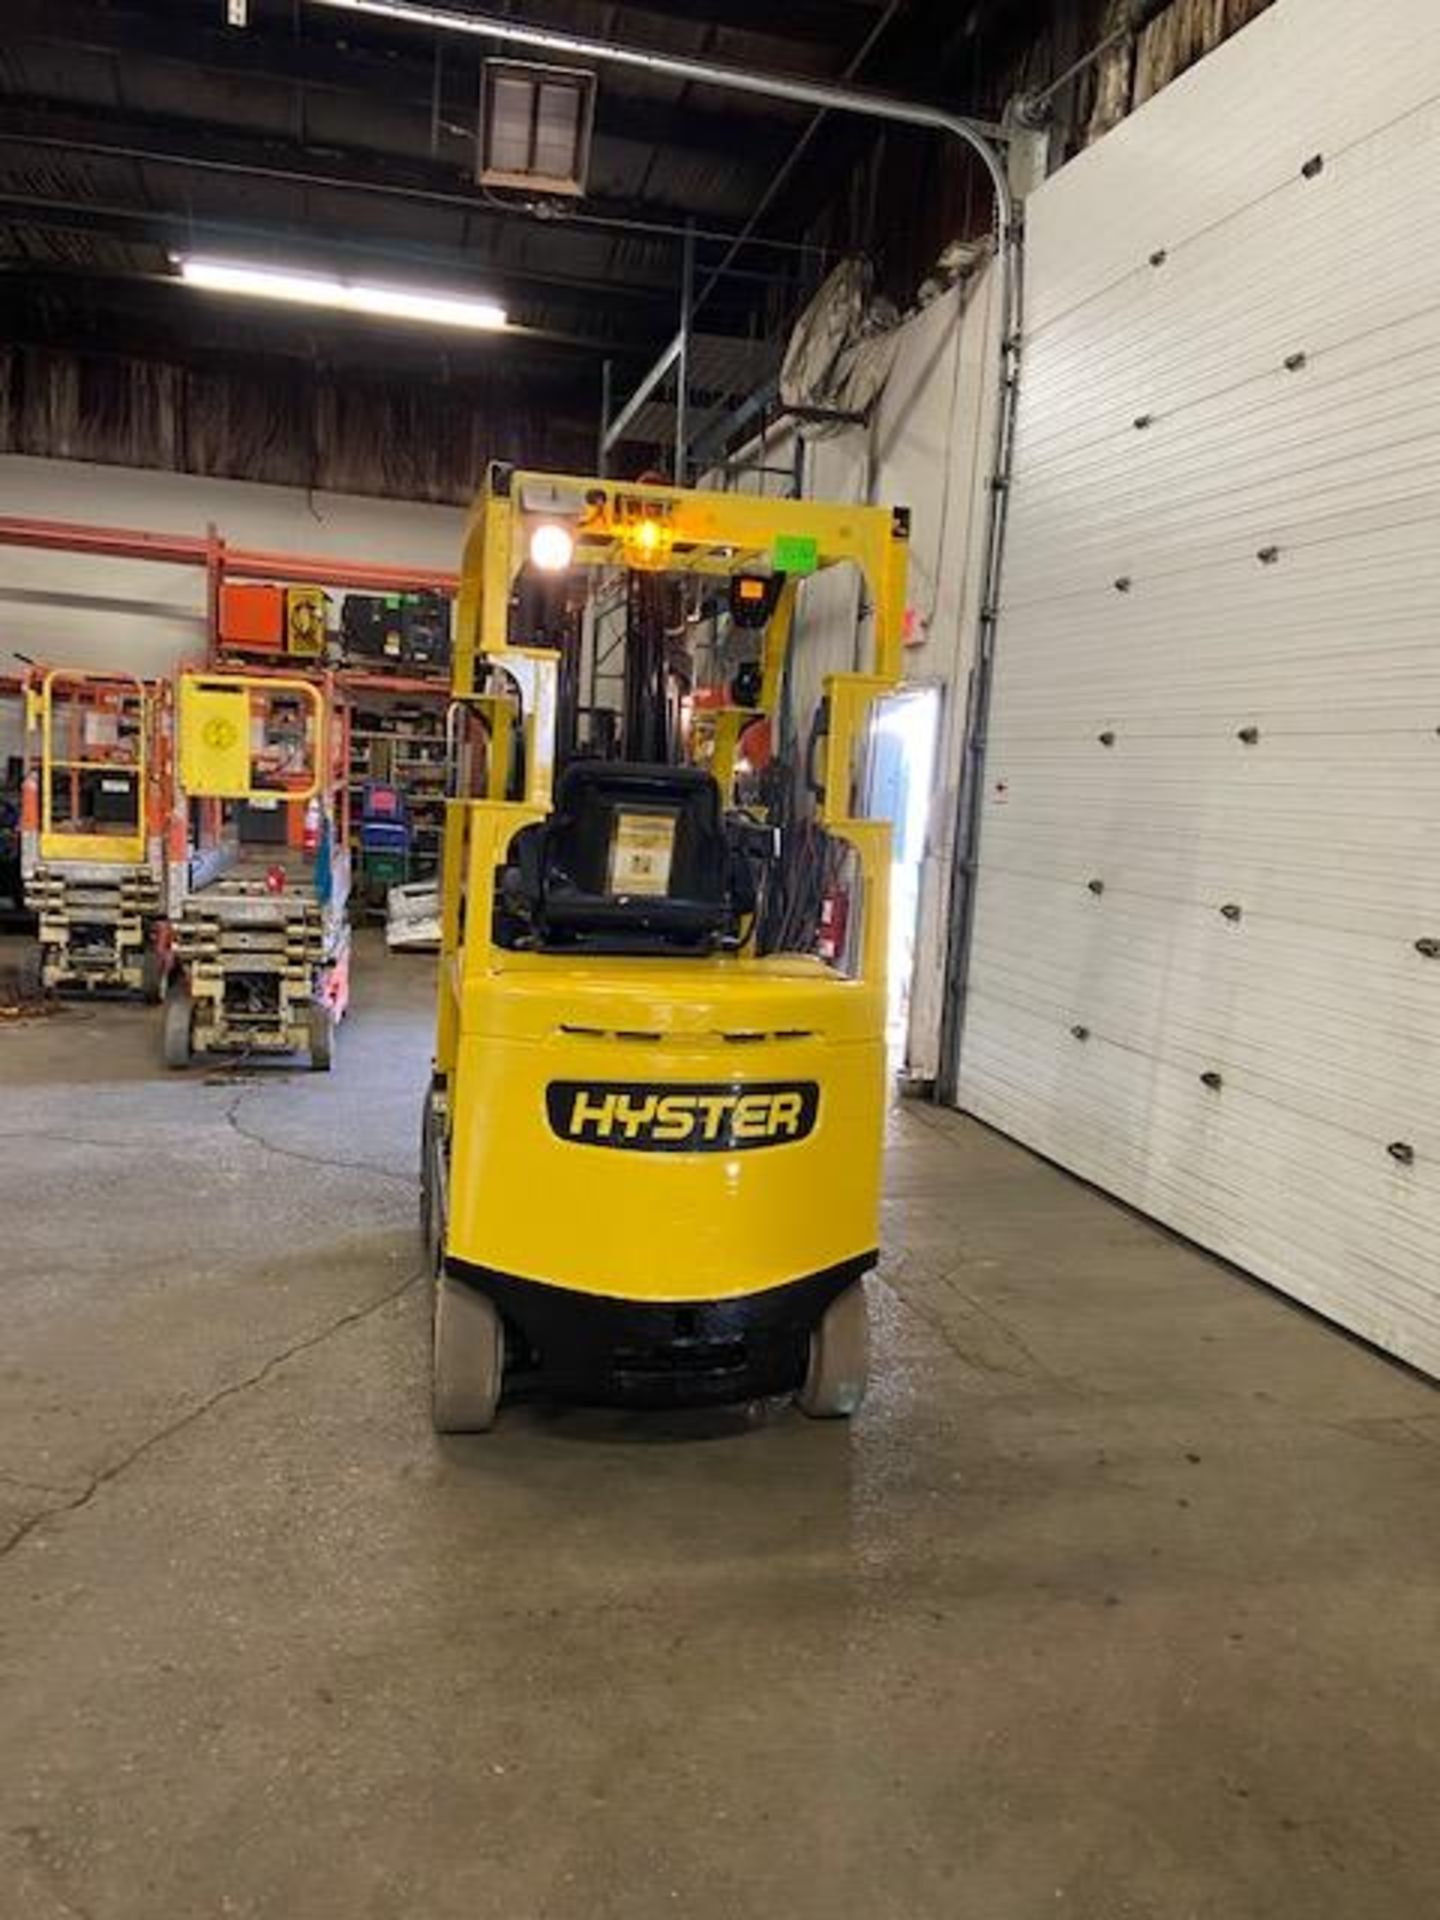 FREE CUSTOMS - 2013 Hyster 5000lbs Capacity Forklift Electric with 4-STAGE MAST with sideshift - Image 3 of 3